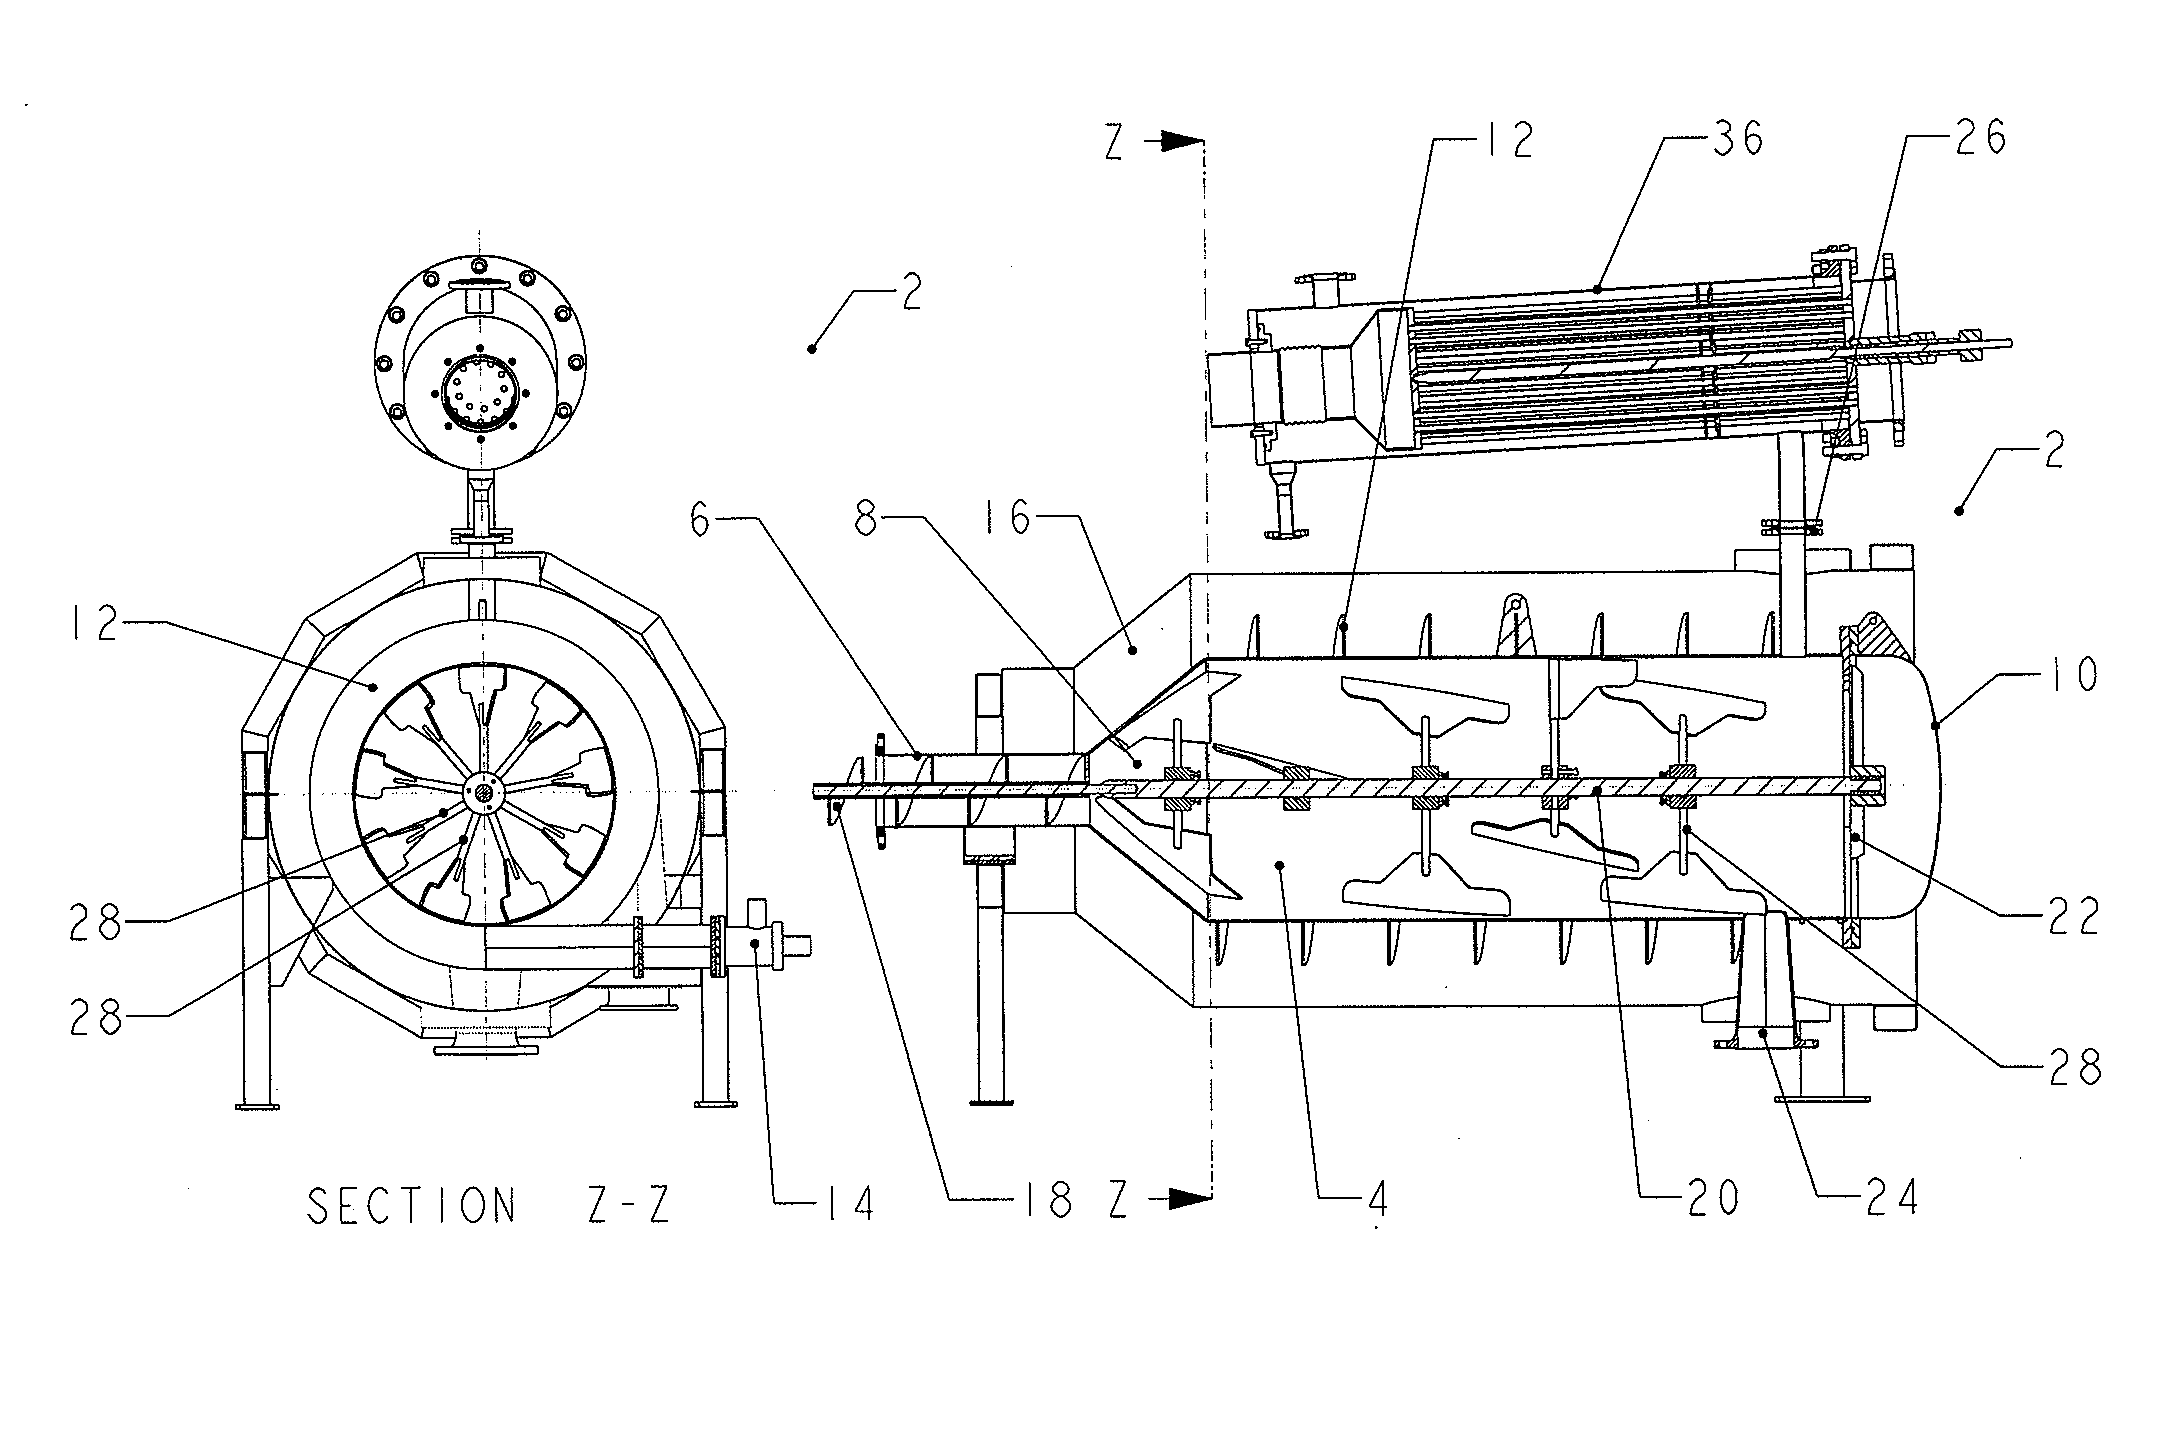 Apparatus and method for pyrolysis of organic waste